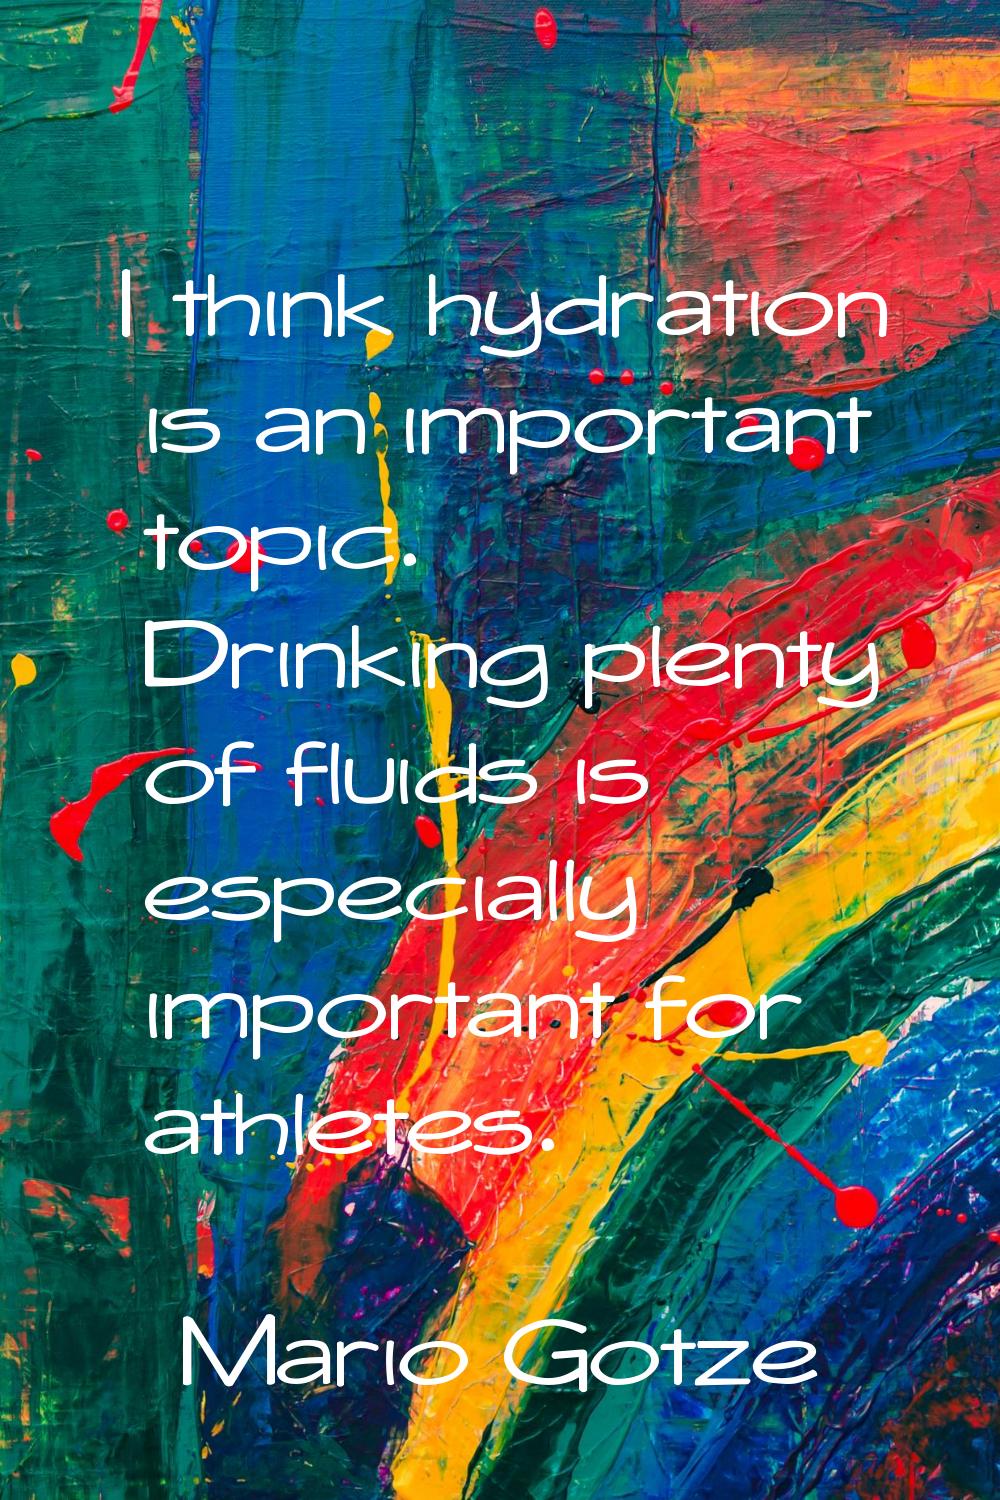 I think hydration is an important topic. Drinking plenty of fluids is especially important for athl